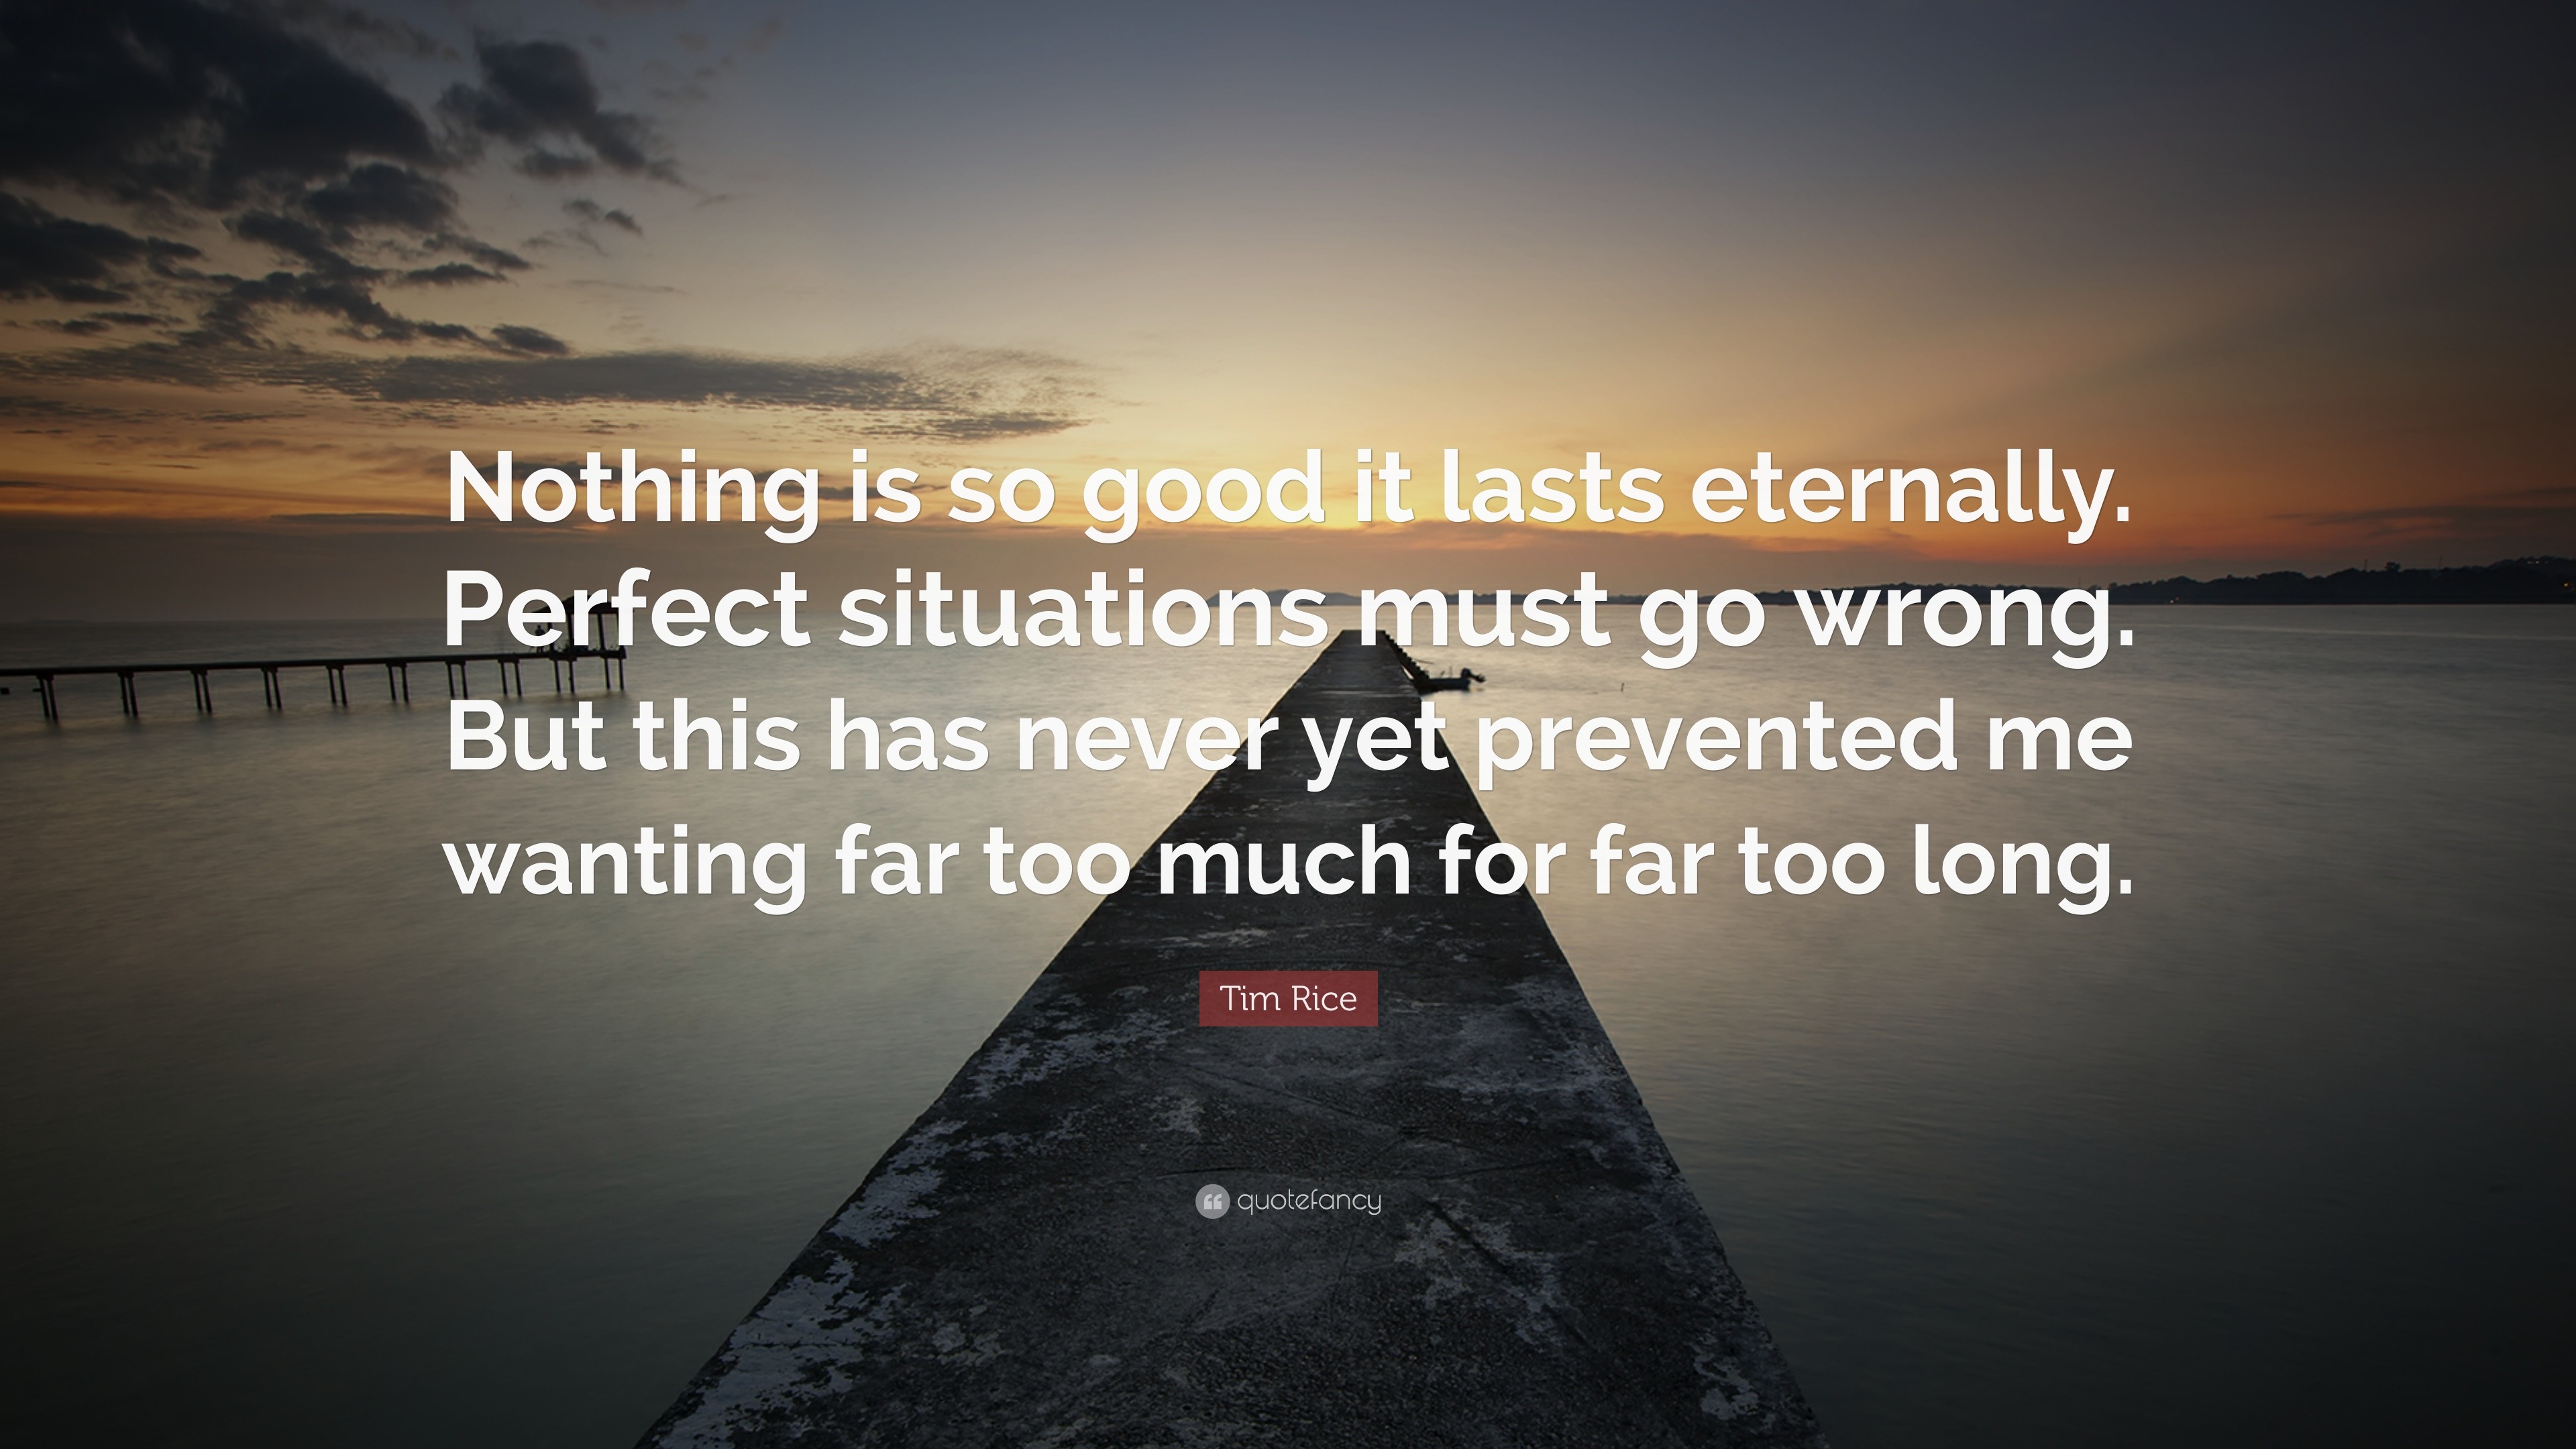 Tim Rice Quote: “Nothing is so good it lasts eternally. Perfect ...